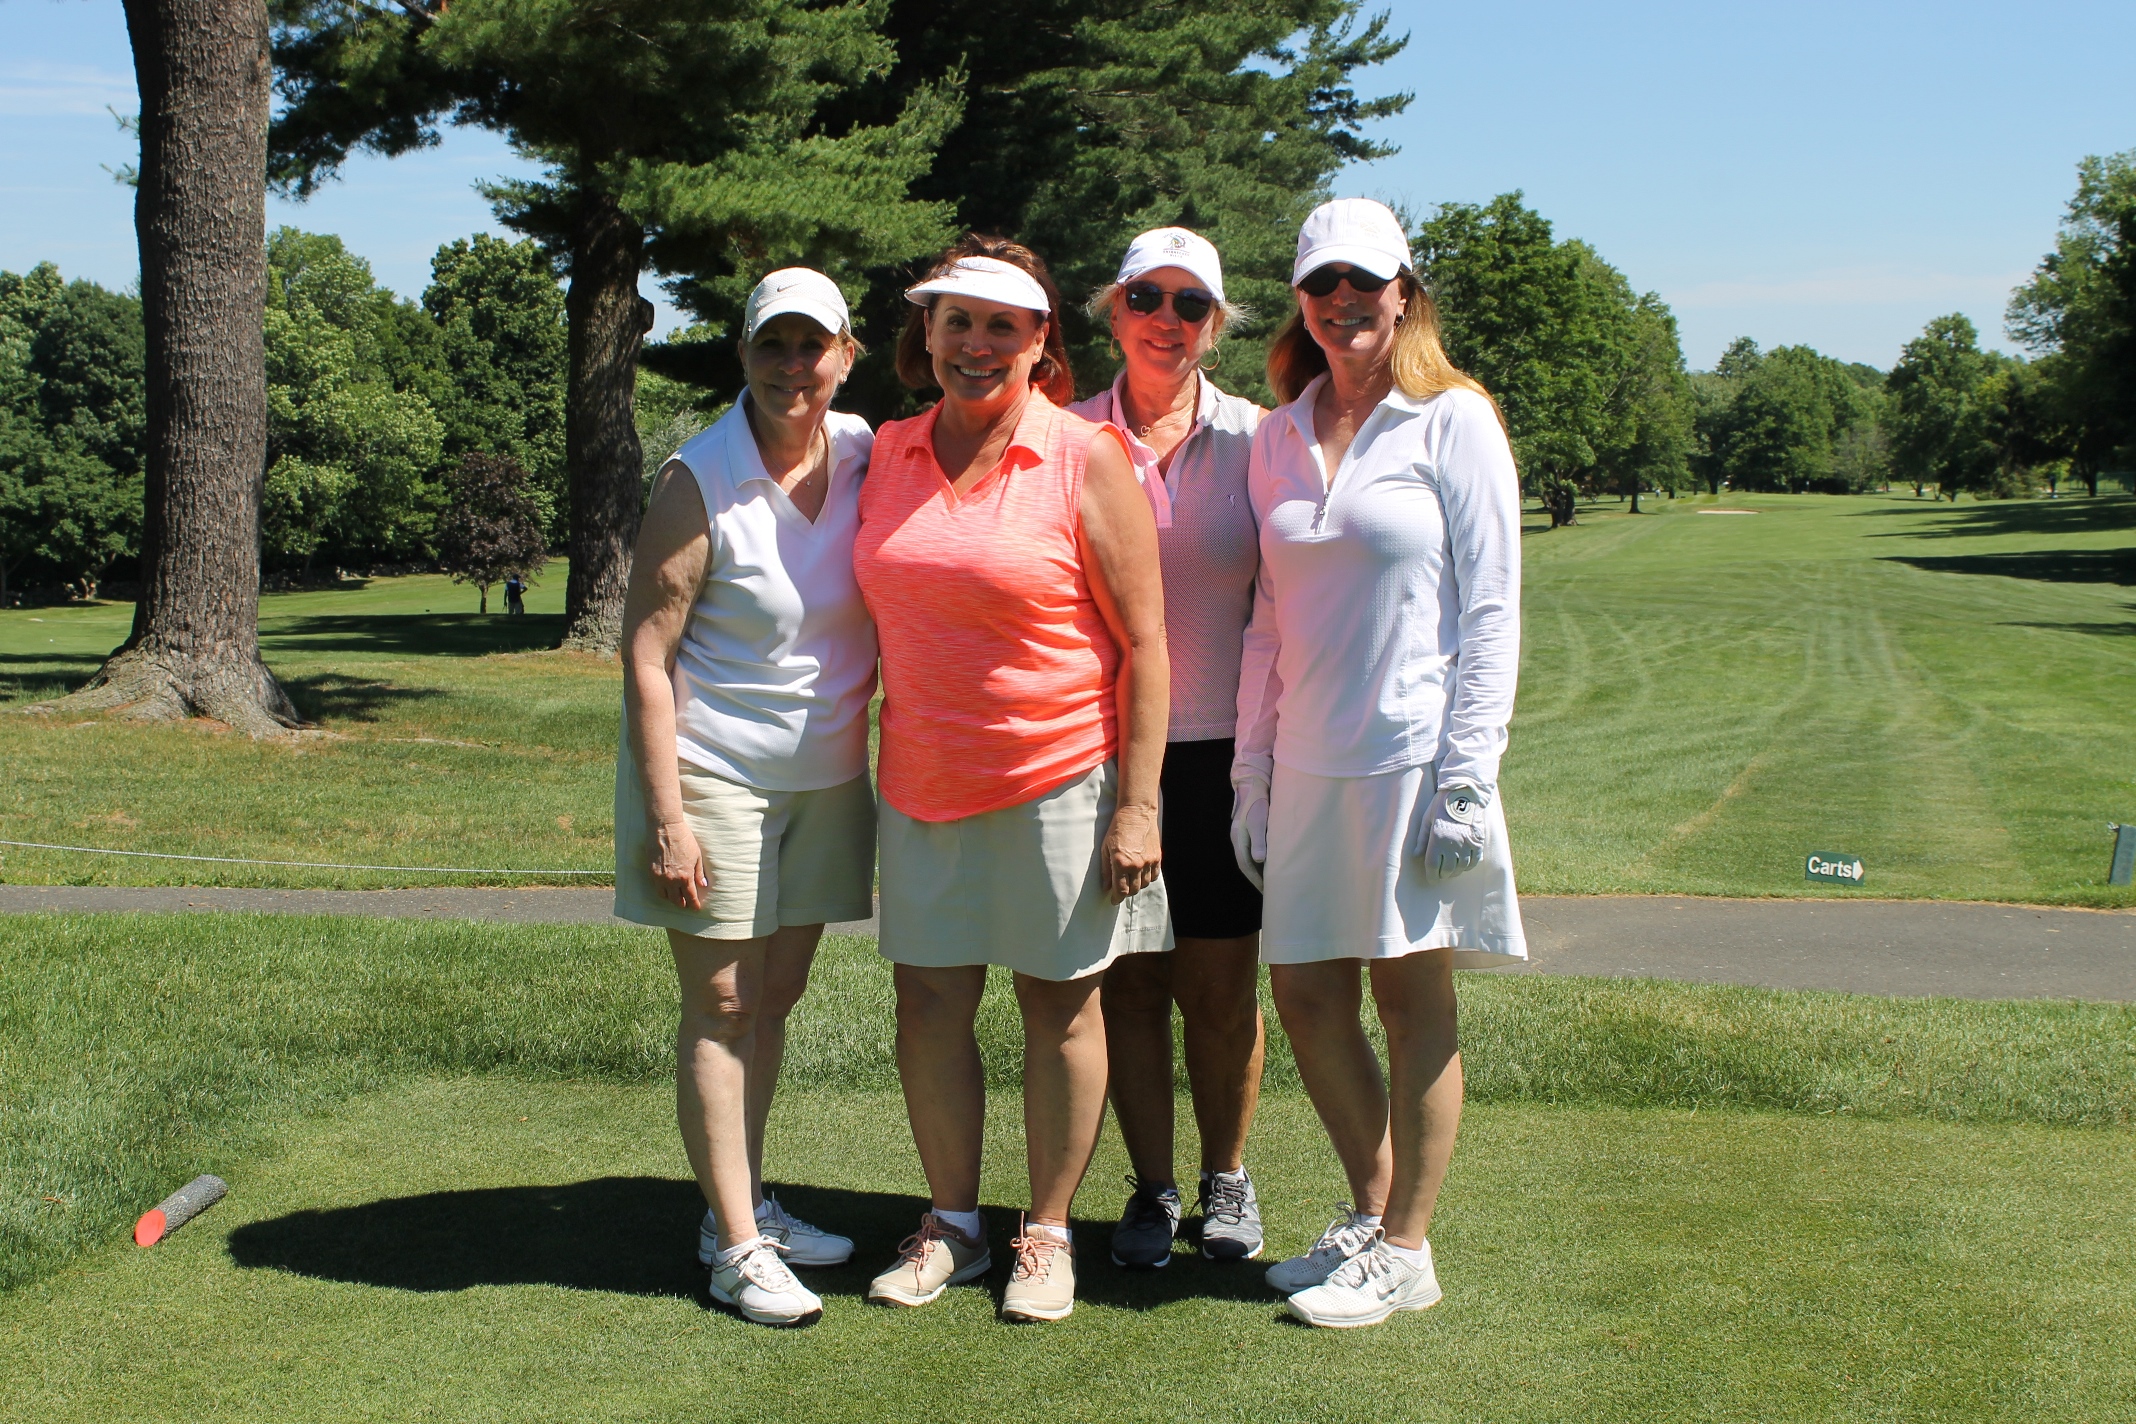 The Michele Fraser Geller foursome at Hospice of Westchester’s 16th Annual Golf Invitational at Westchester Hills Golf Club in White Plains on Tuesday, June 19.